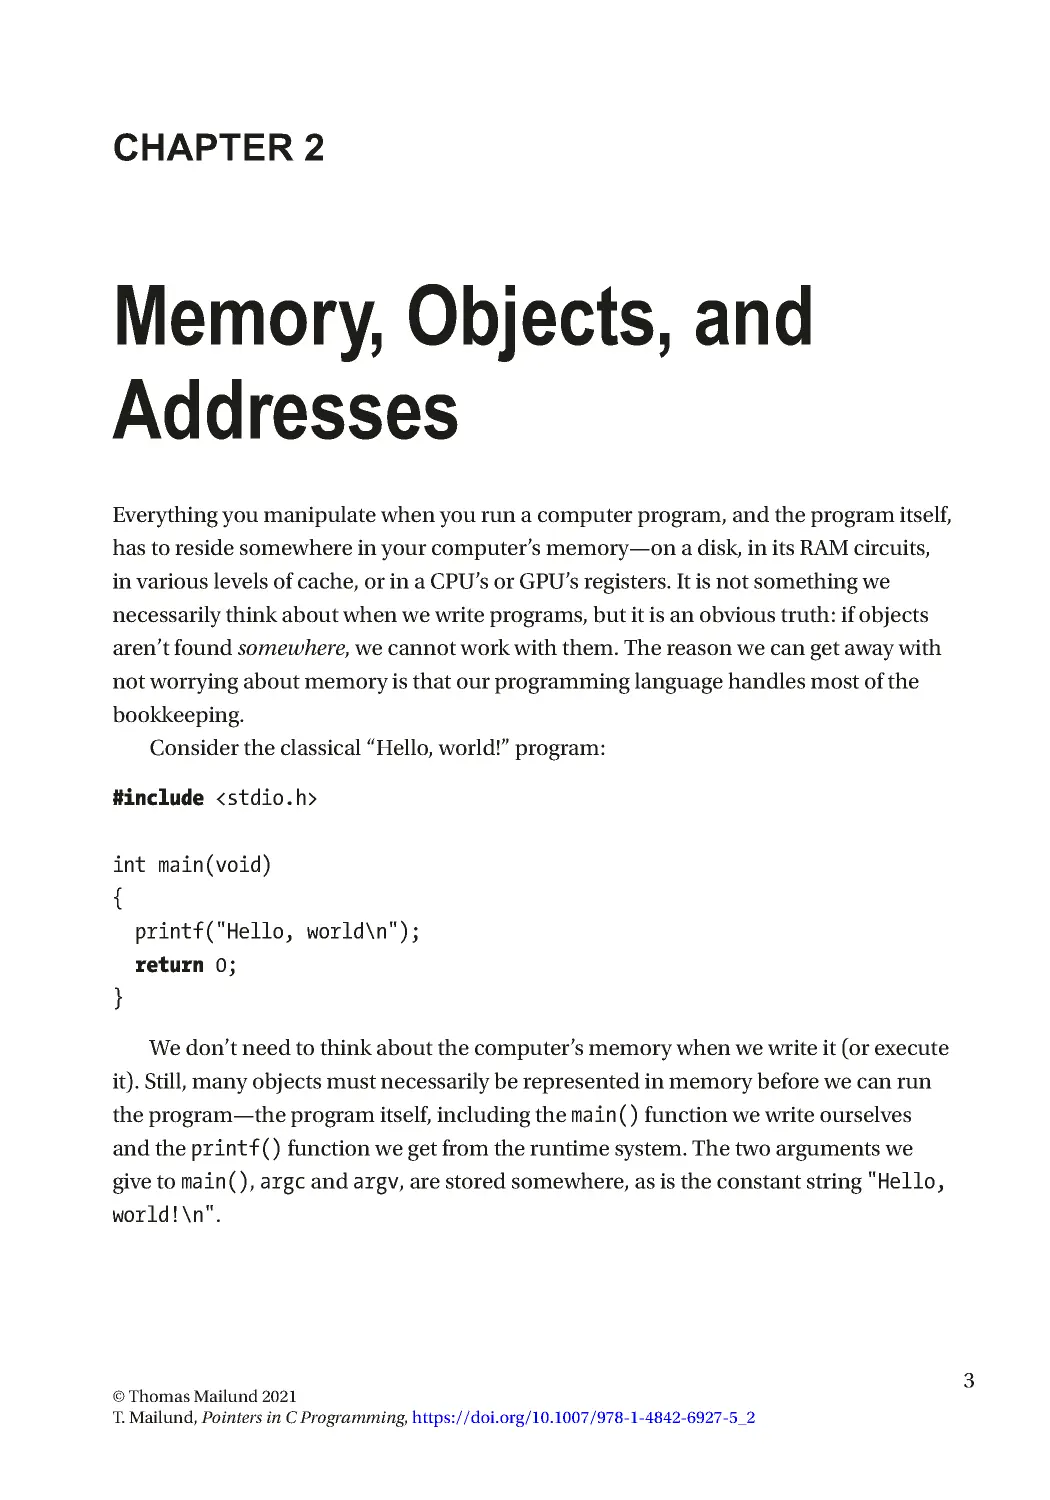 Chapter 2: Memory, Objects, and Addresses